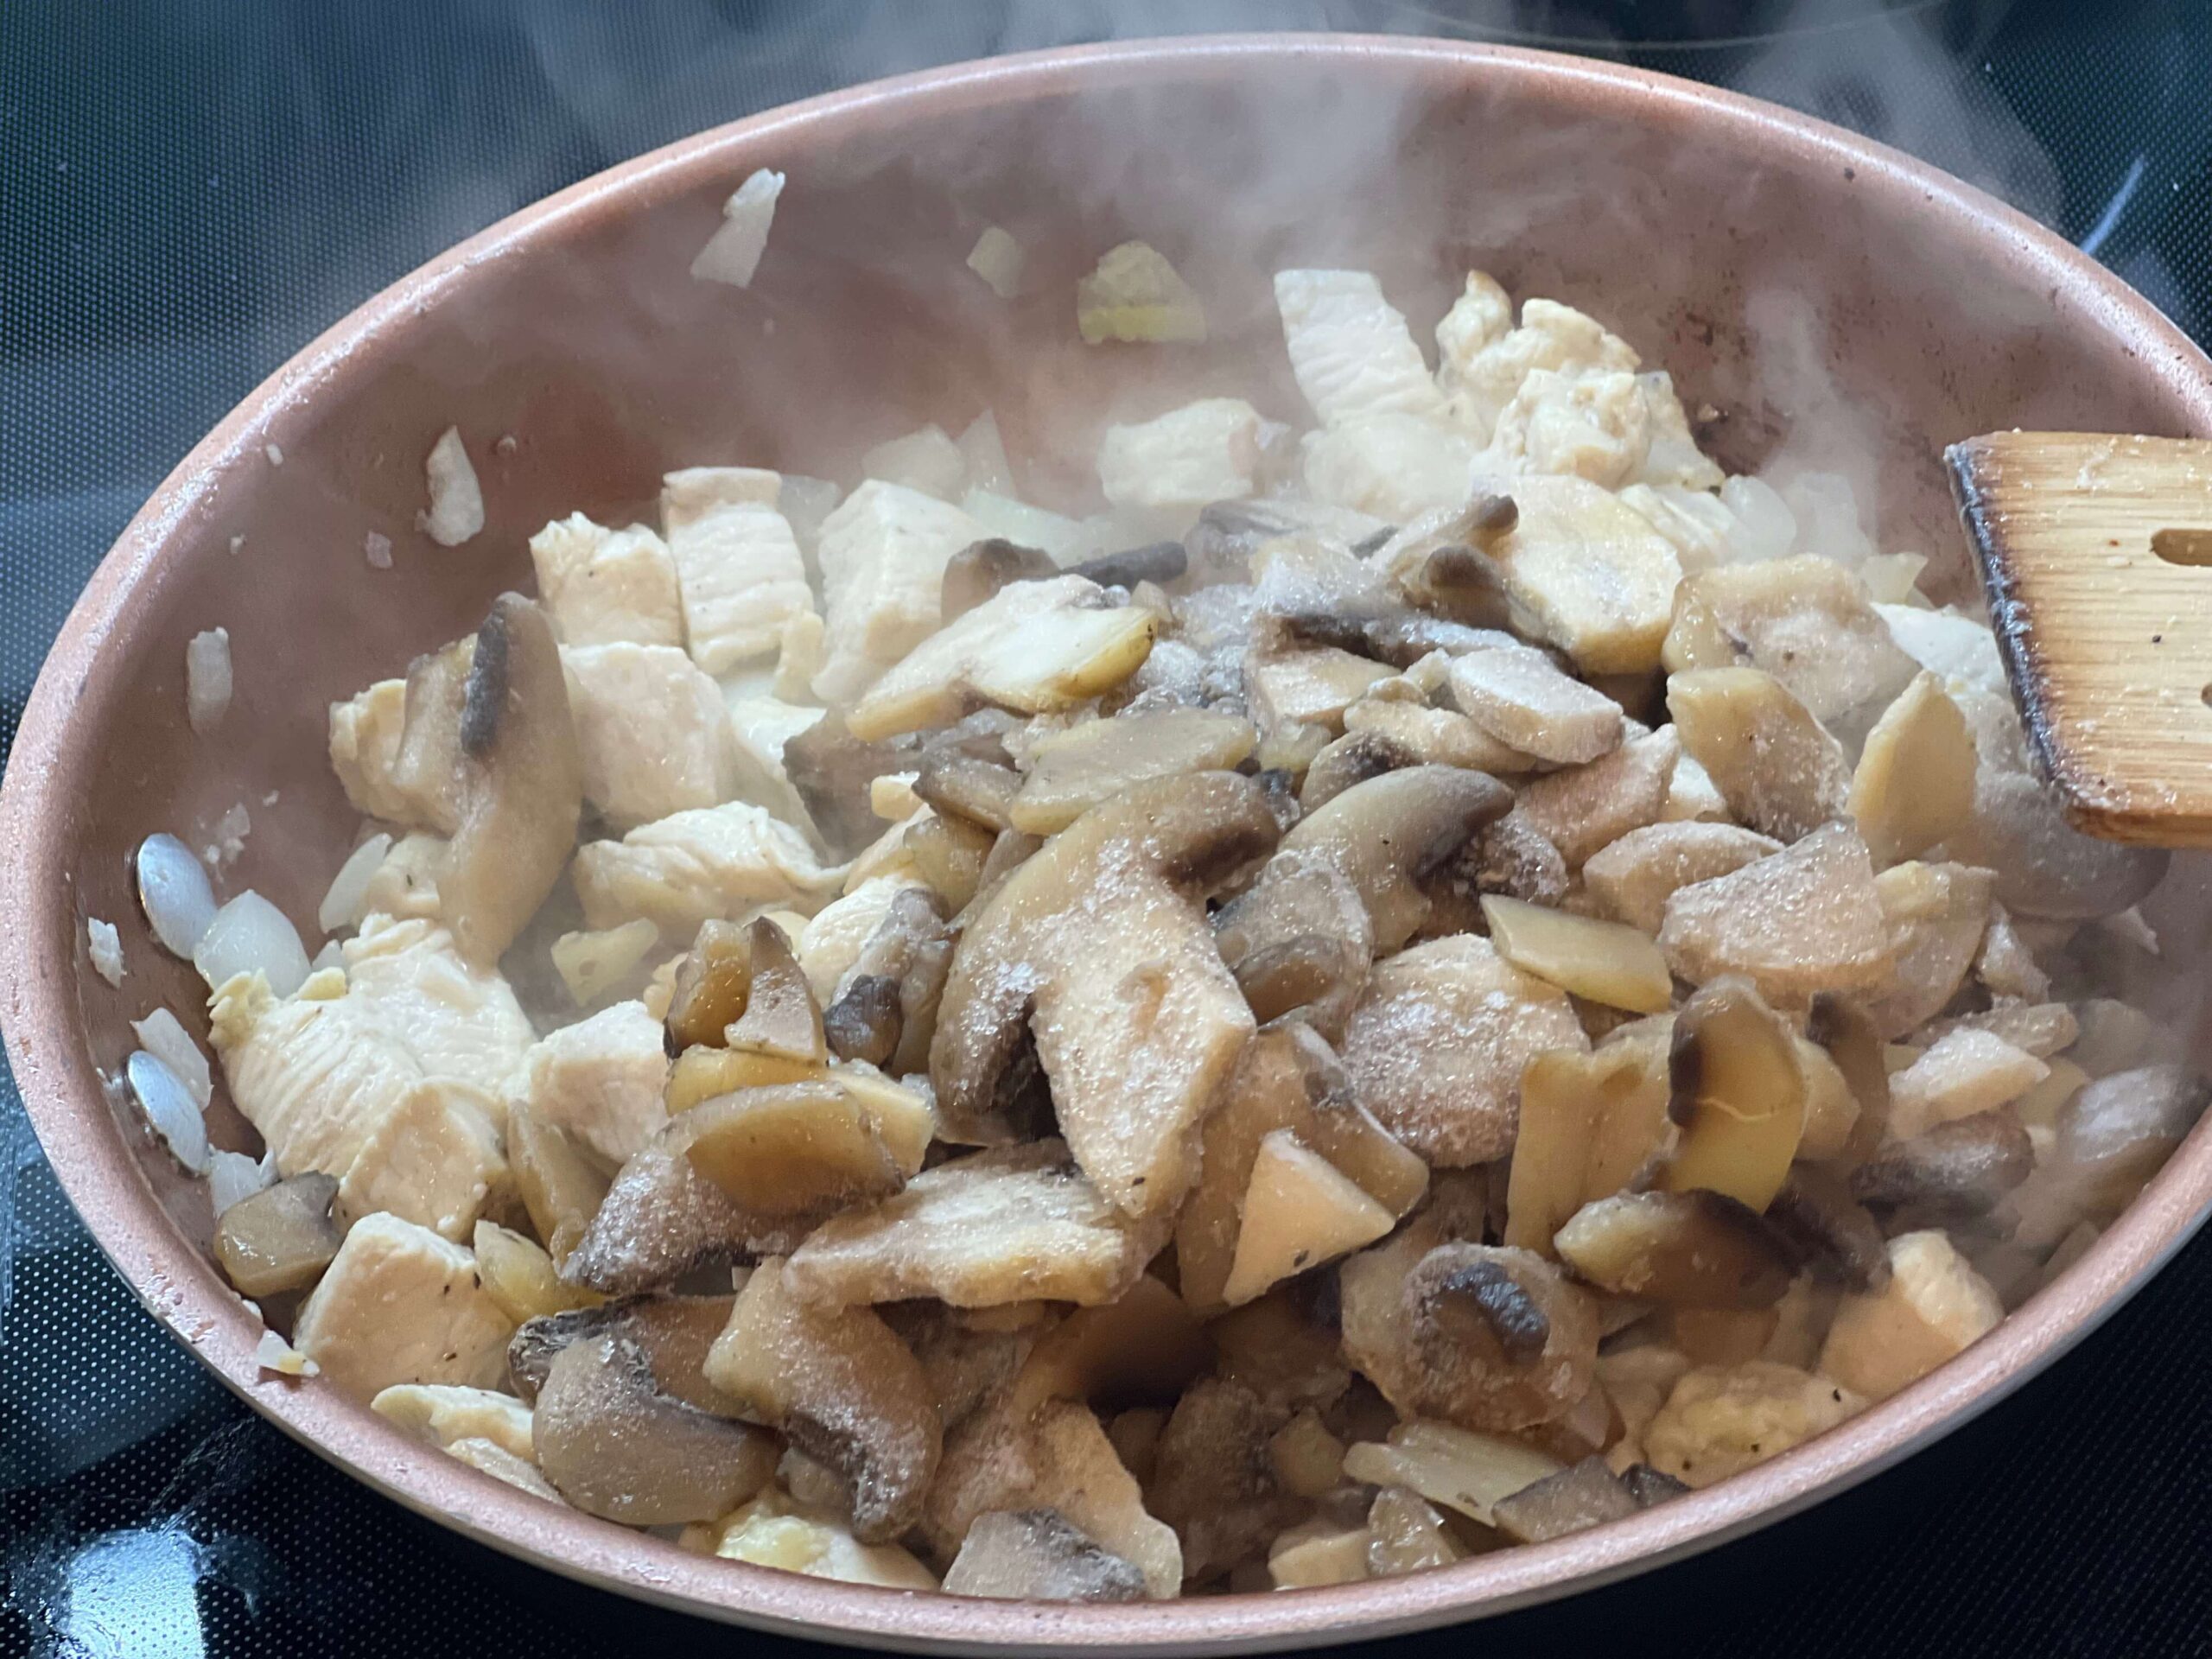 Add in the mushrooms to cook